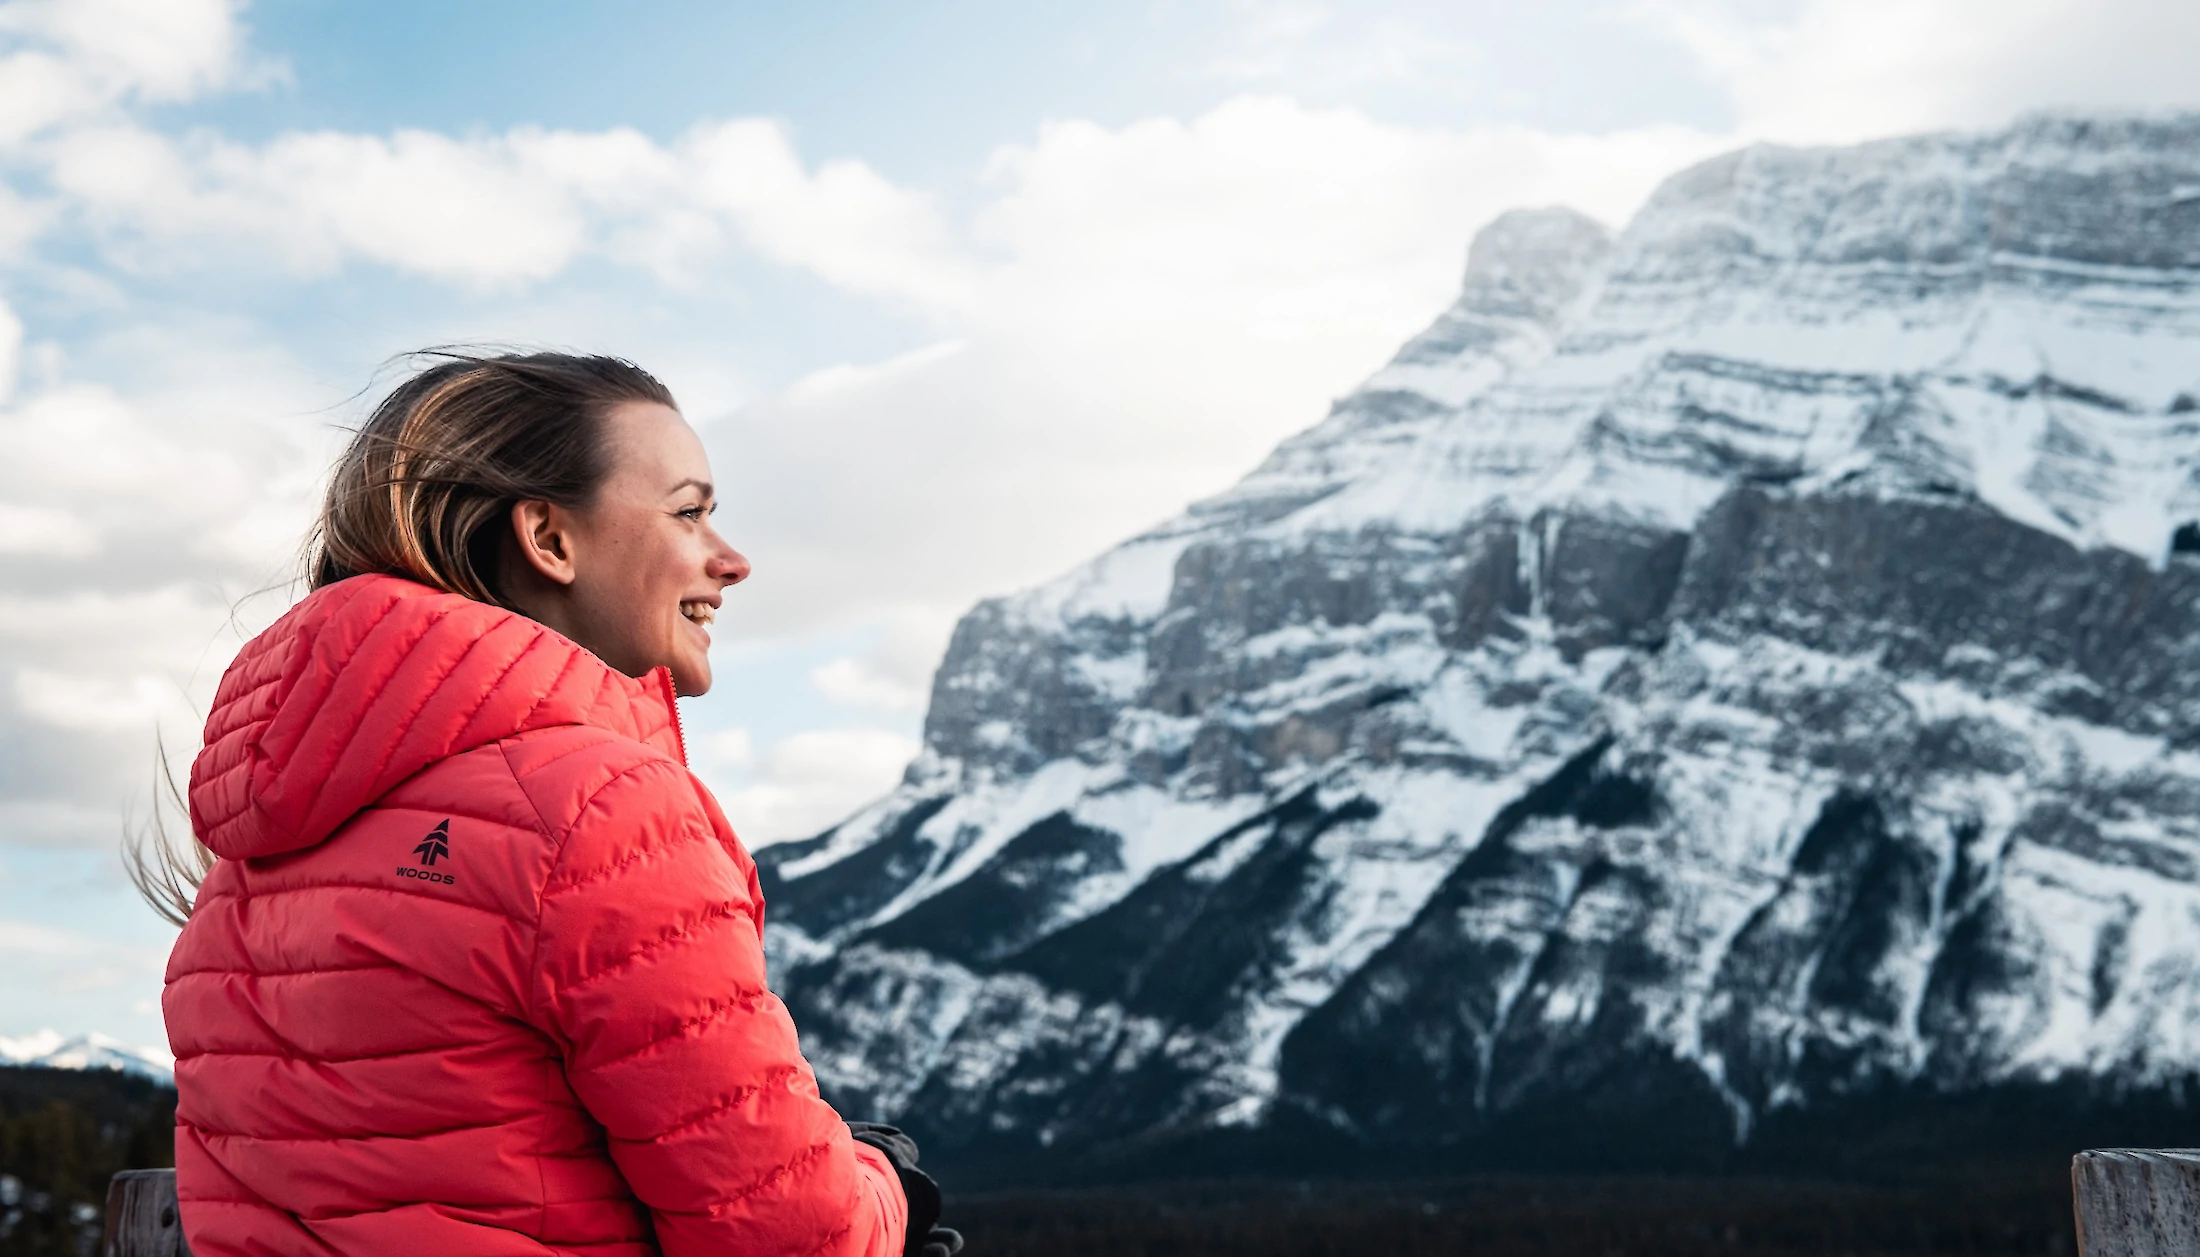 A woman smiling and admiring the view of Mount Rundle in Banff